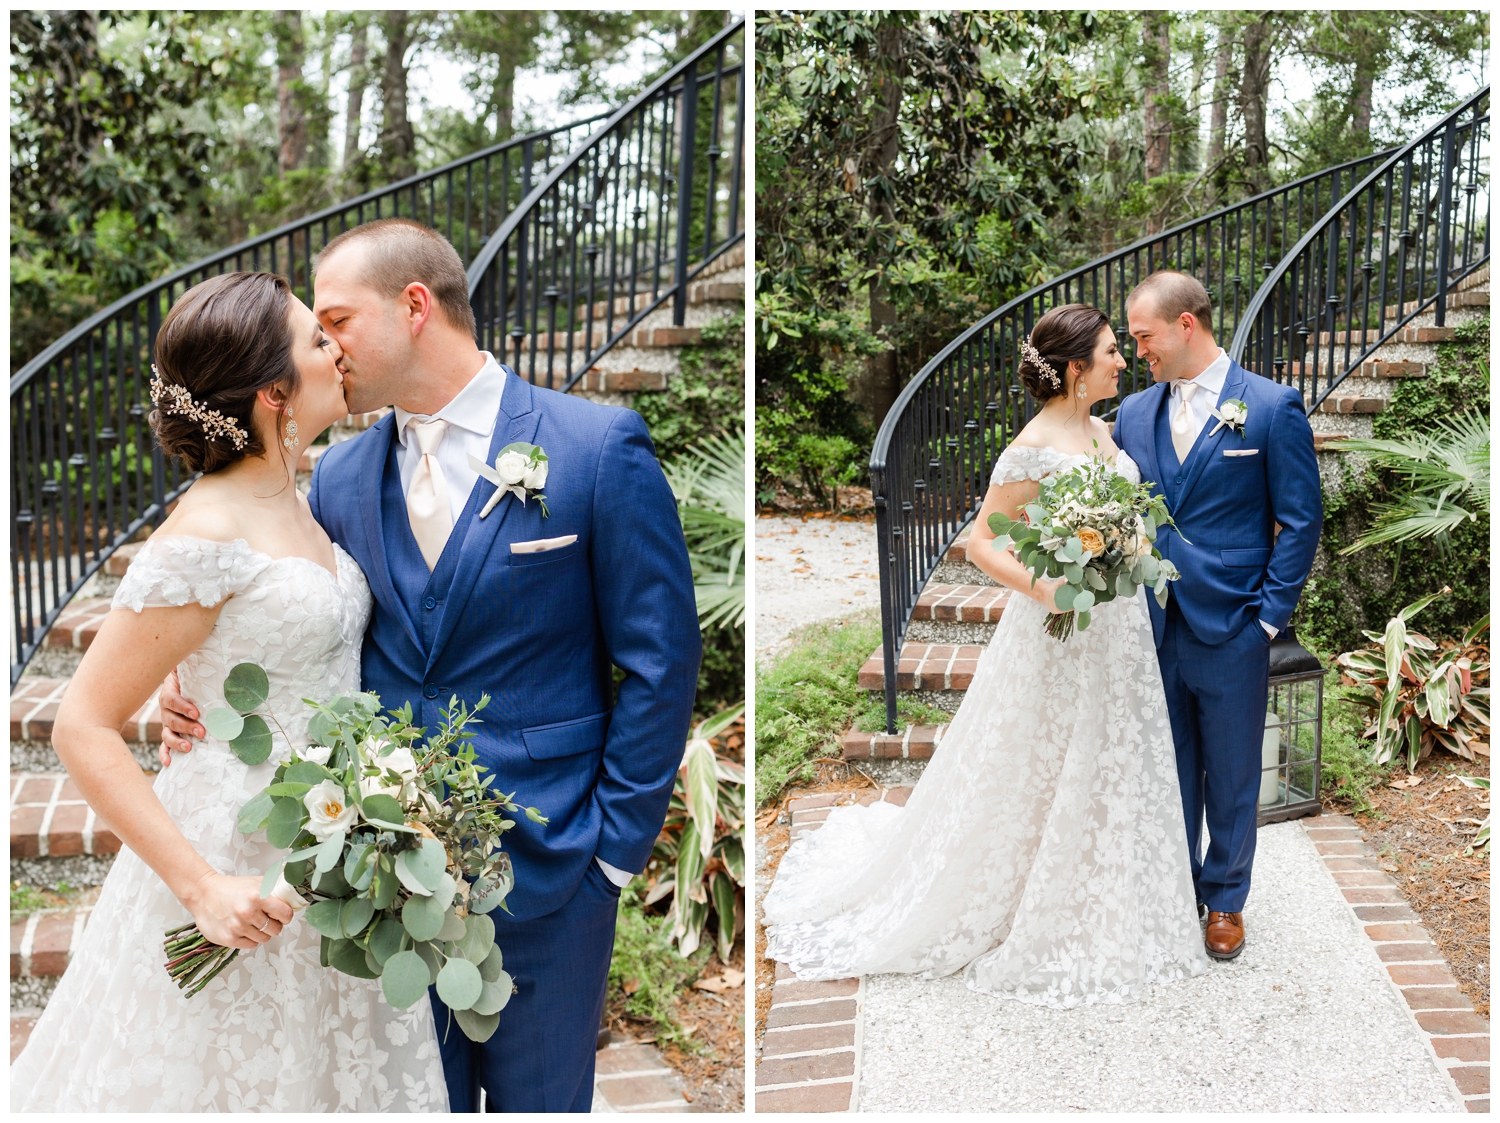 bride and room kissing by staircase at intimate Hilton Head wedding